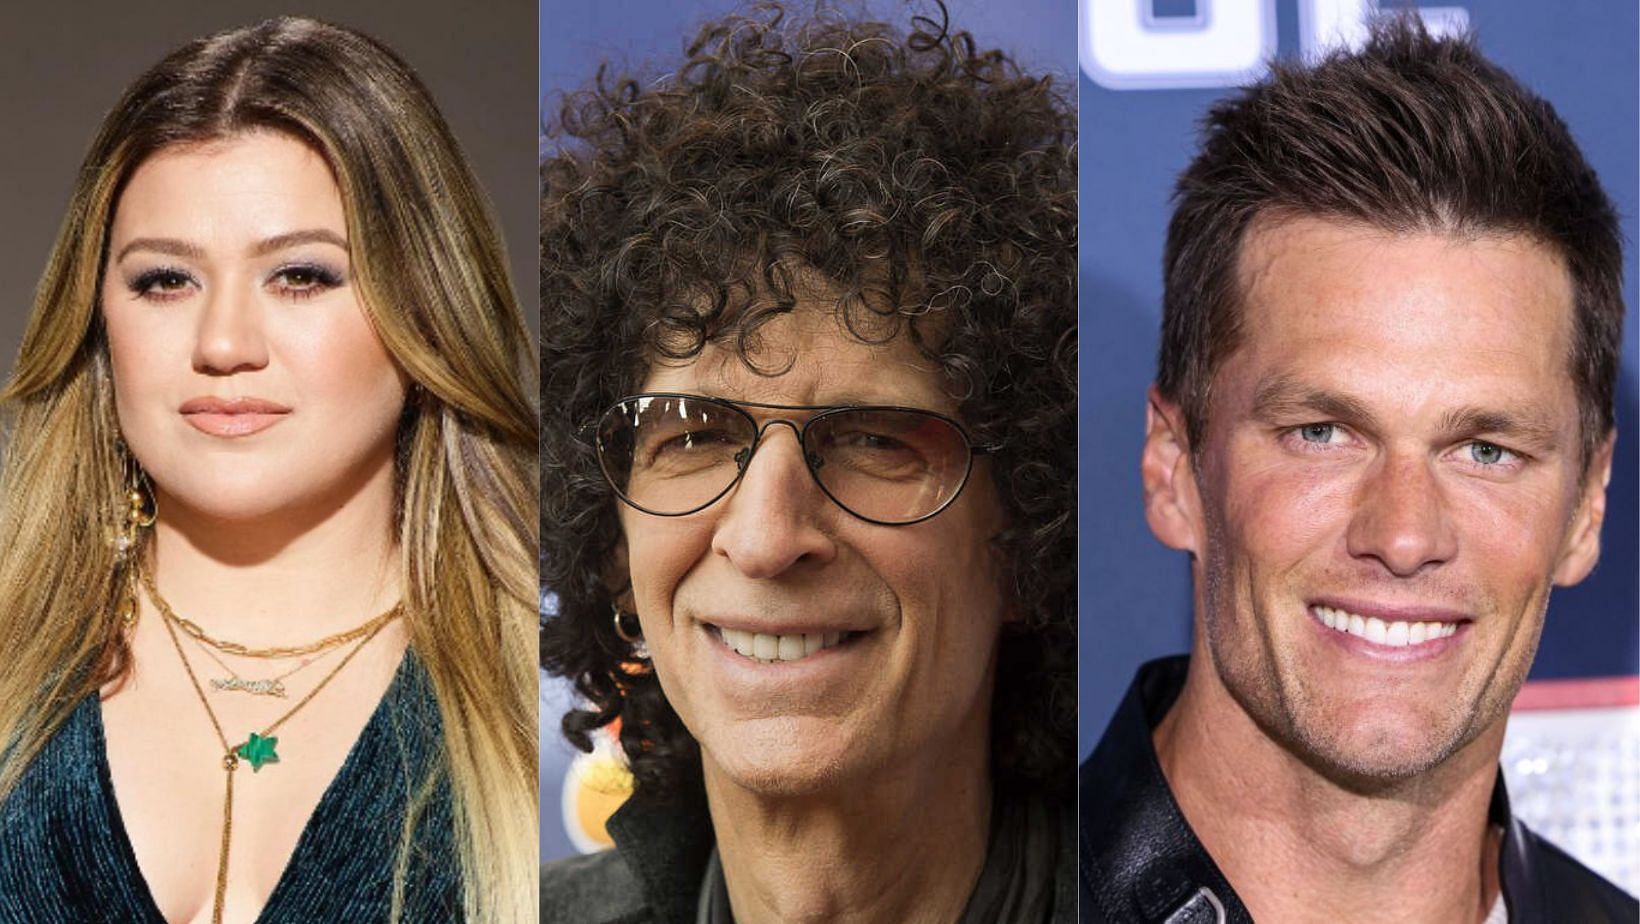 Howard Stern offers Kelly Clarkson a shot at dating Tom Brady following  actress's divorce